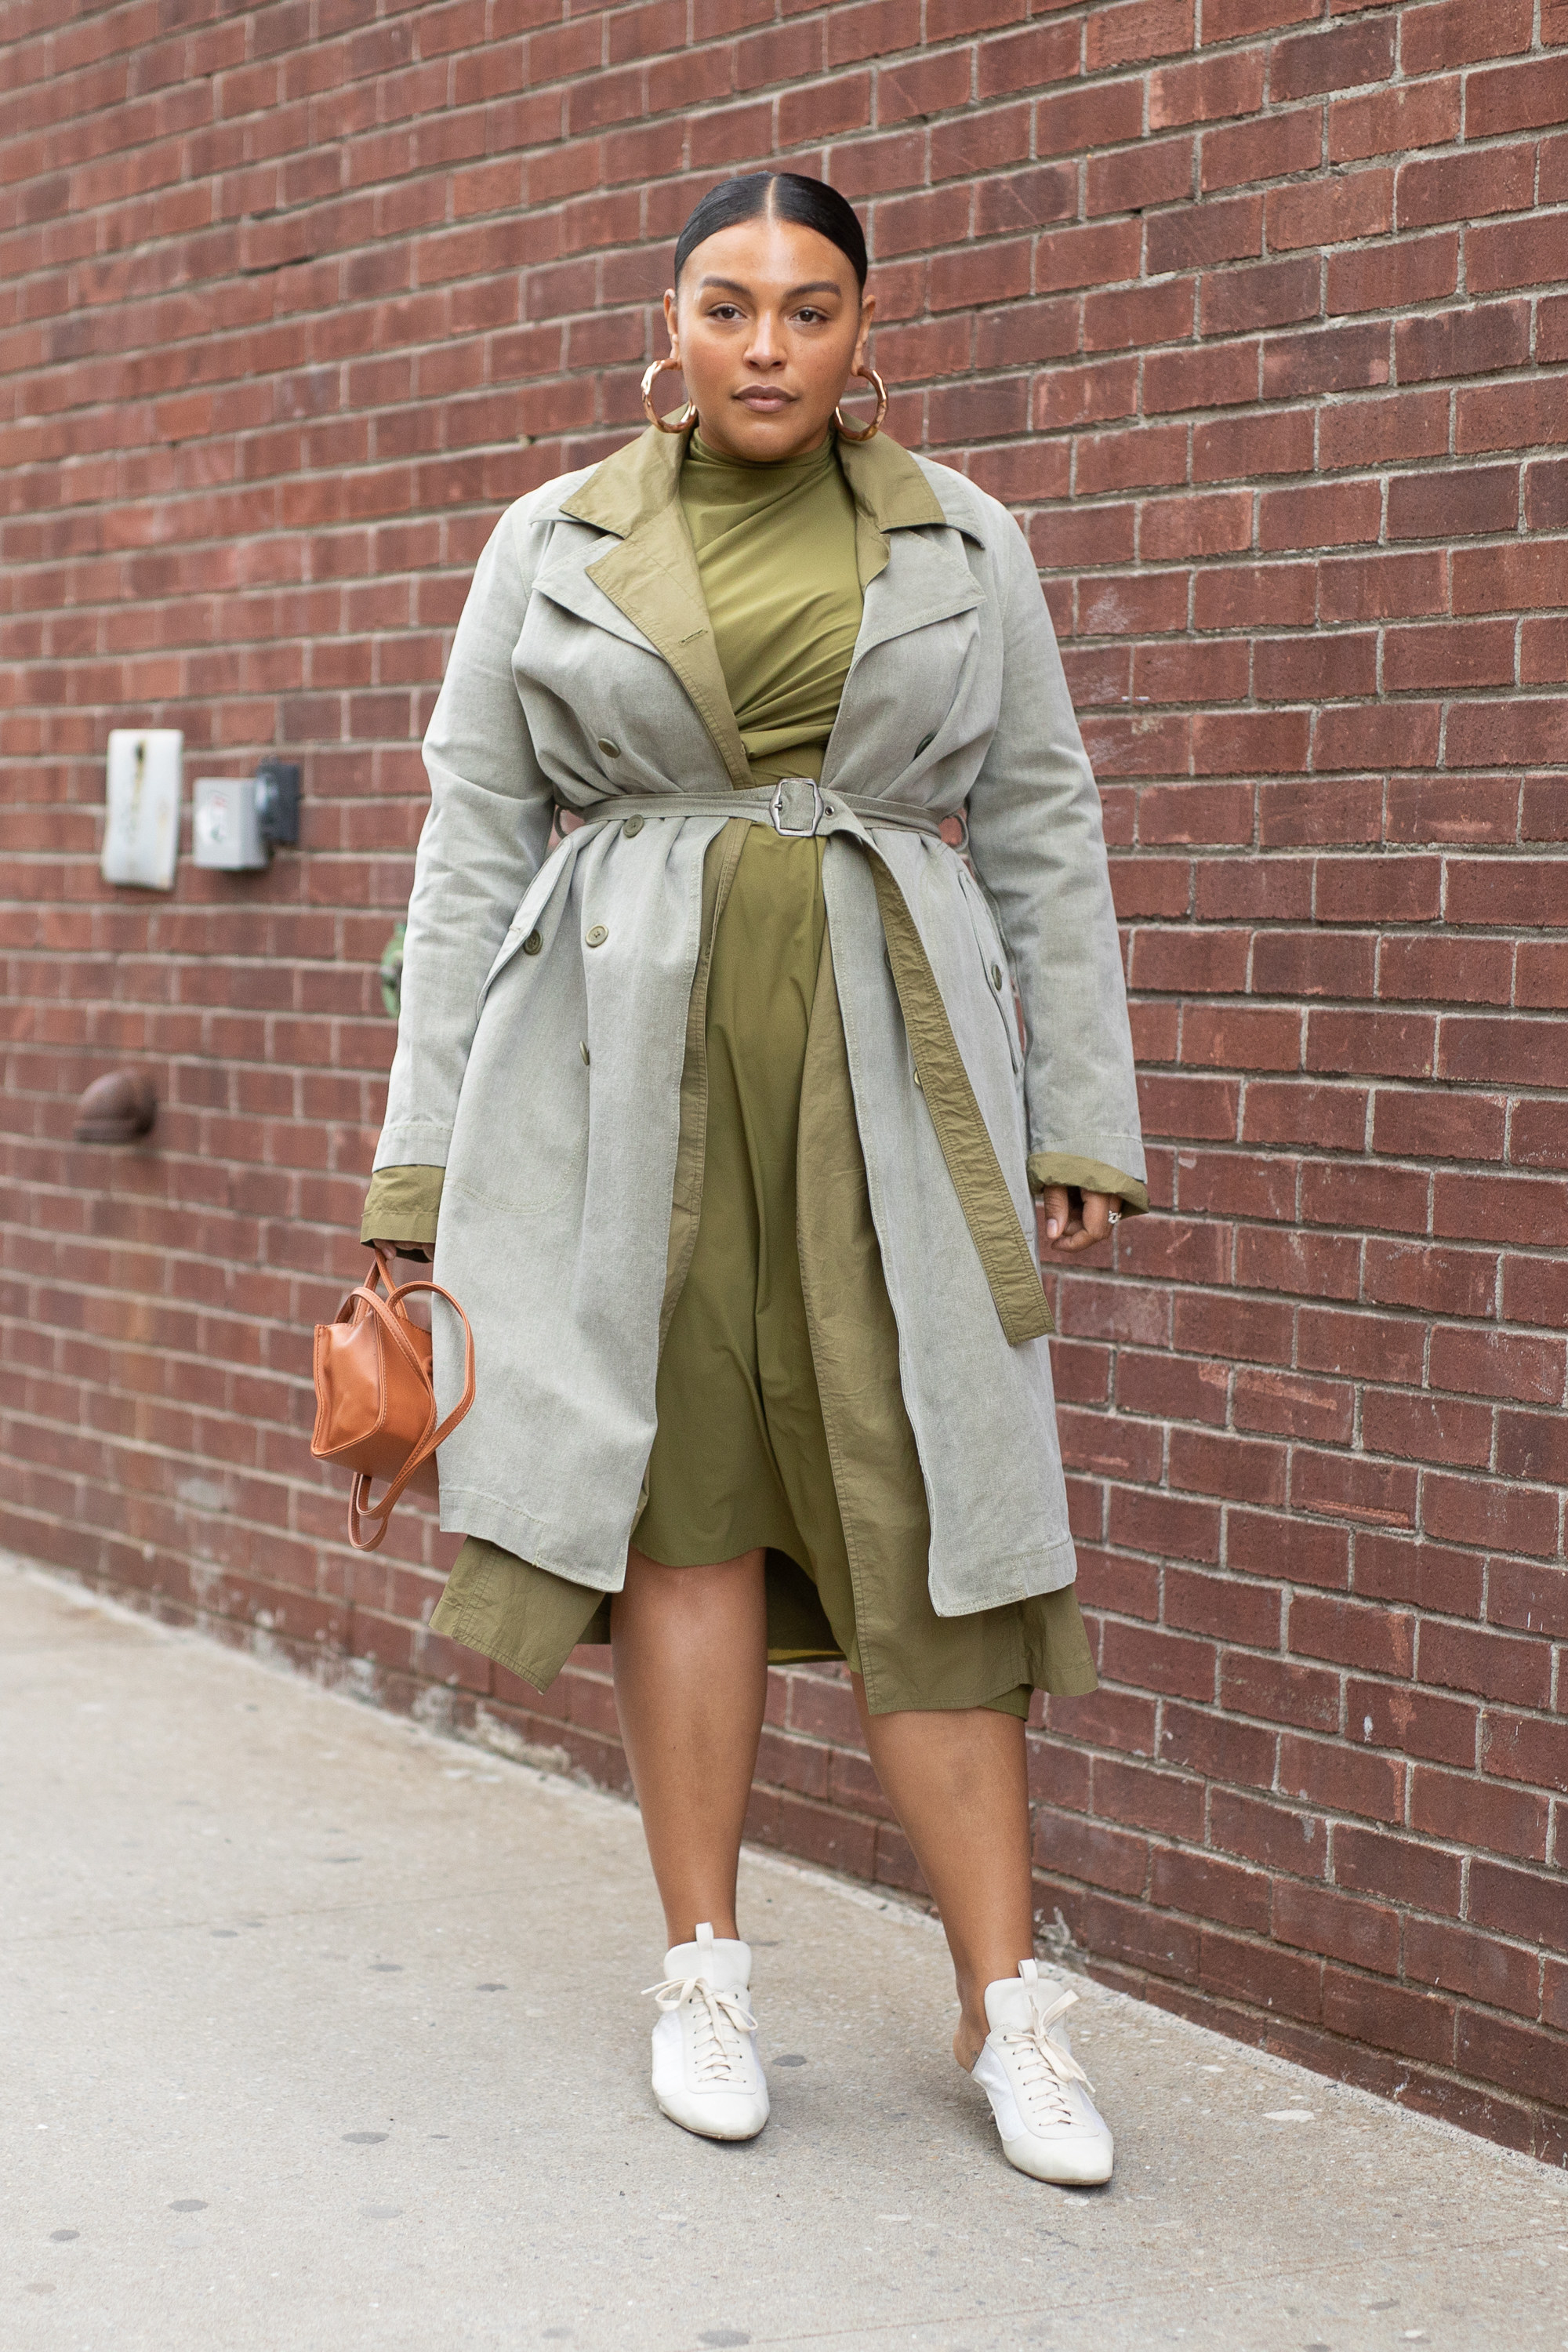 Paloma Elsesser in a green dress, grey coat, and white sneakers